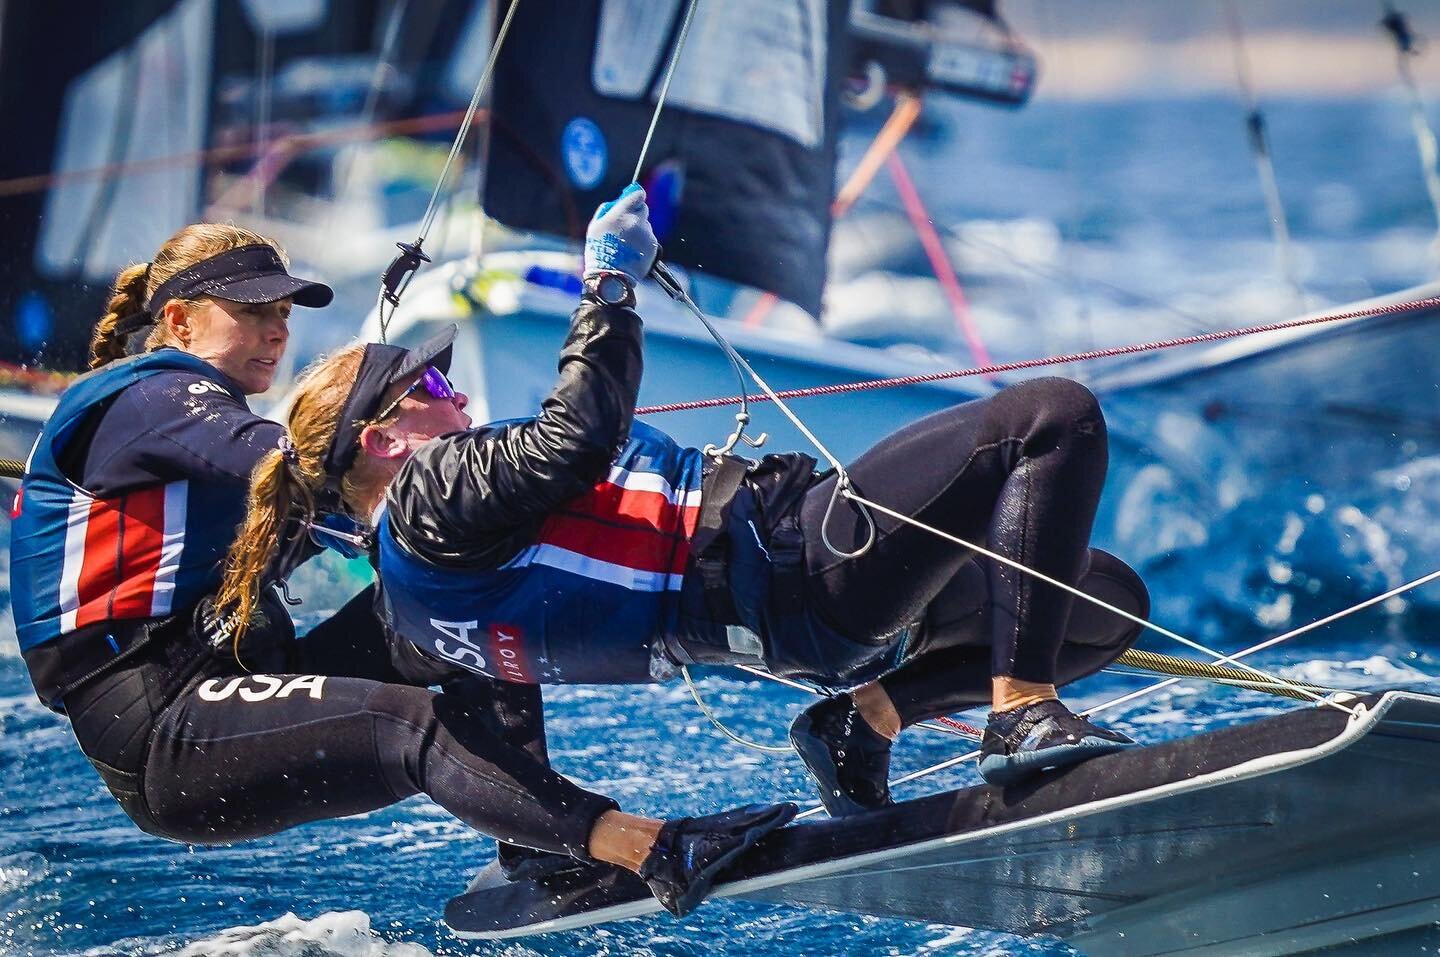 We are sitting in 9th after the first full day of racing in the Gold Fleet at the @ffvoilefra Semaine Olympique Francois. After the gnarly mistral, we&rsquo;ve had a little bit of everything! 

We&rsquo;ve sailed a consistent series so far, which pos